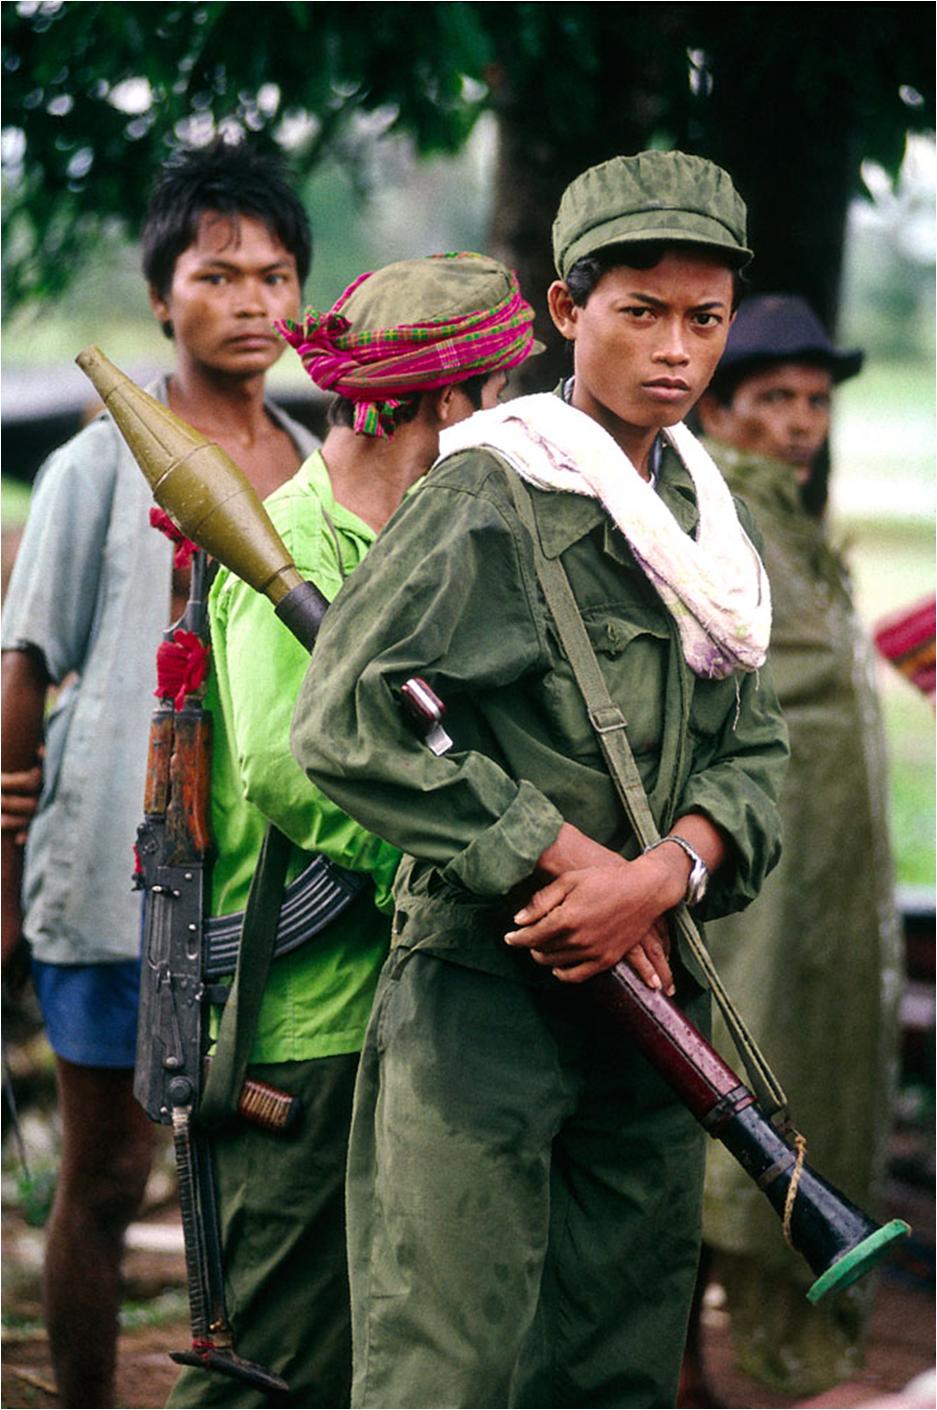 Khmer Rouge soldiers in a zone controlled by the Khmer Rouge.